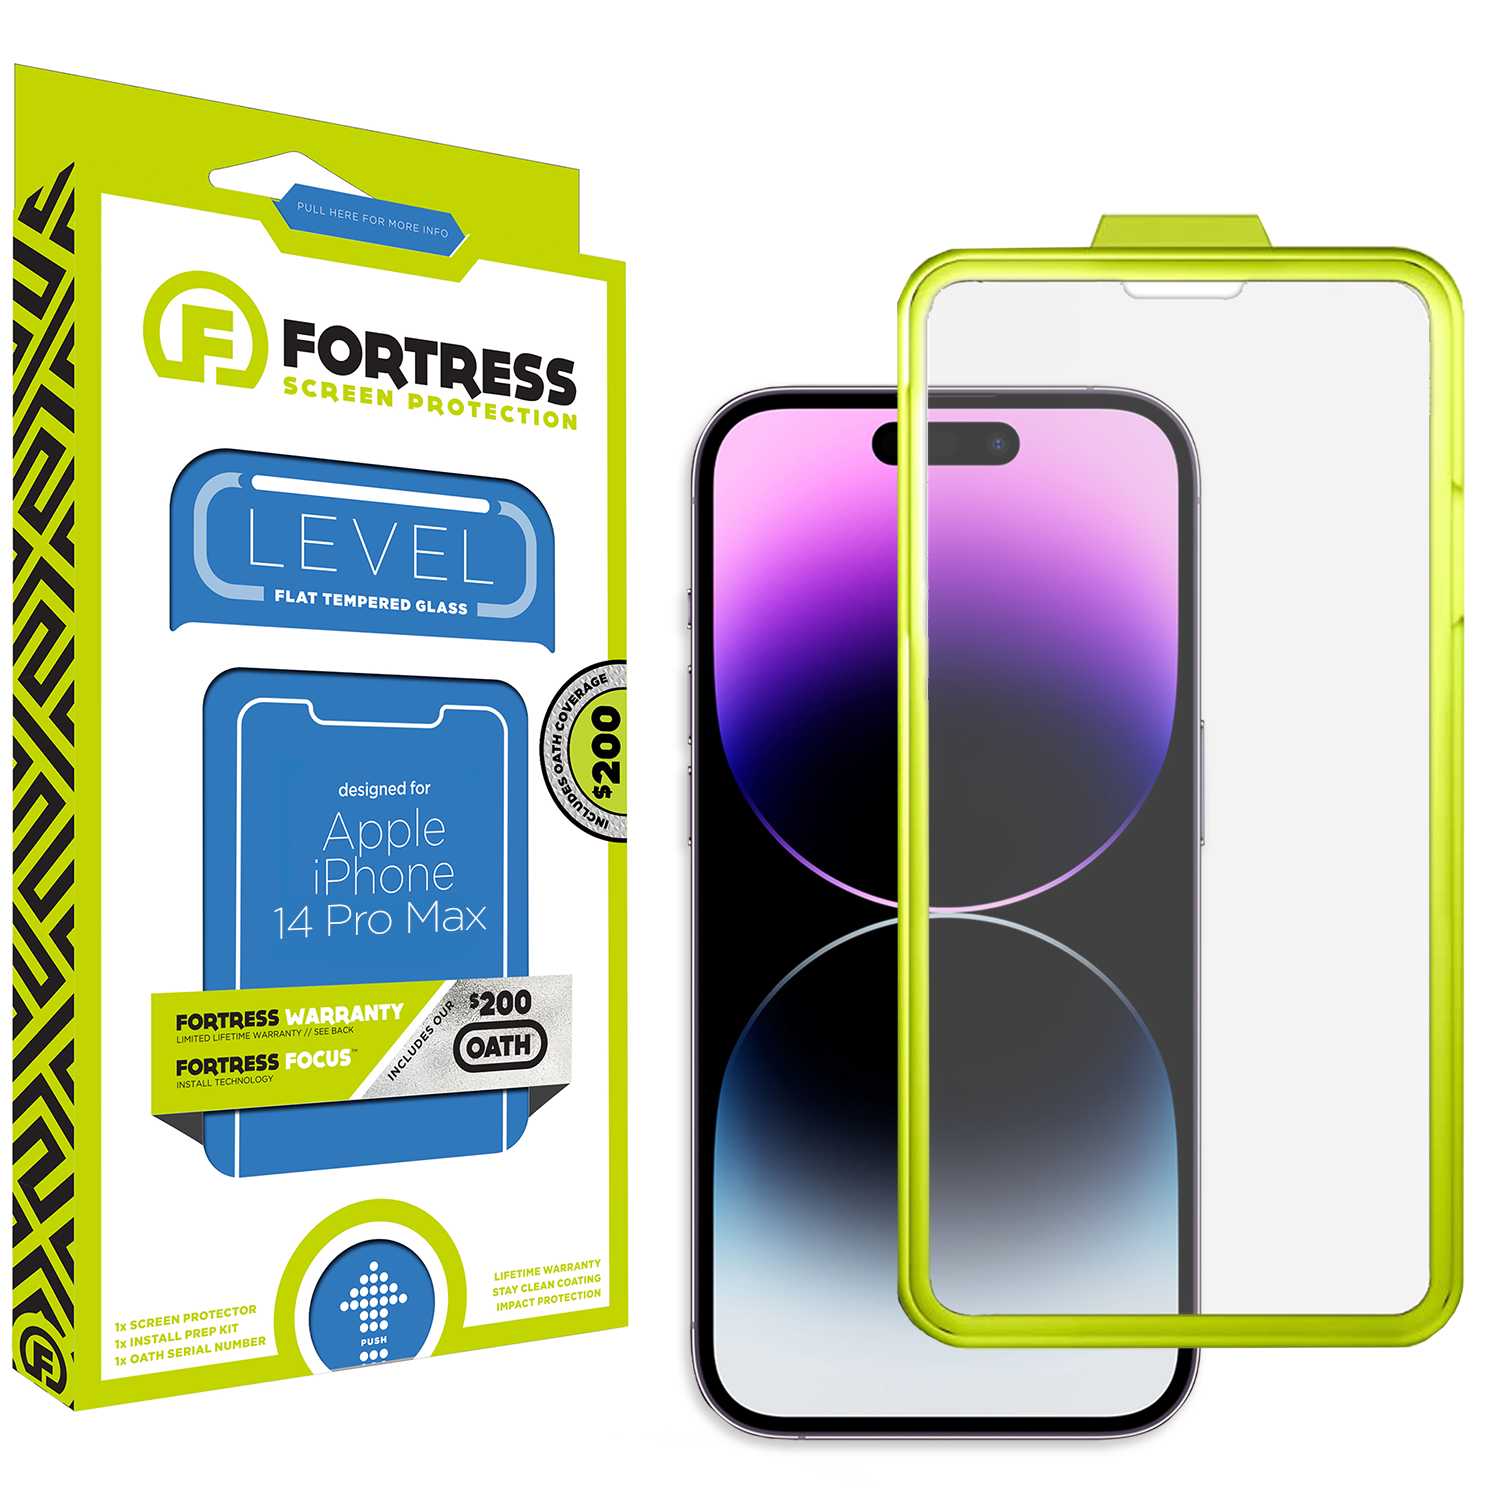 Fortress iPhone 14 Pro Max Screen Protector - $200 Protection  Scooch Screen Protector